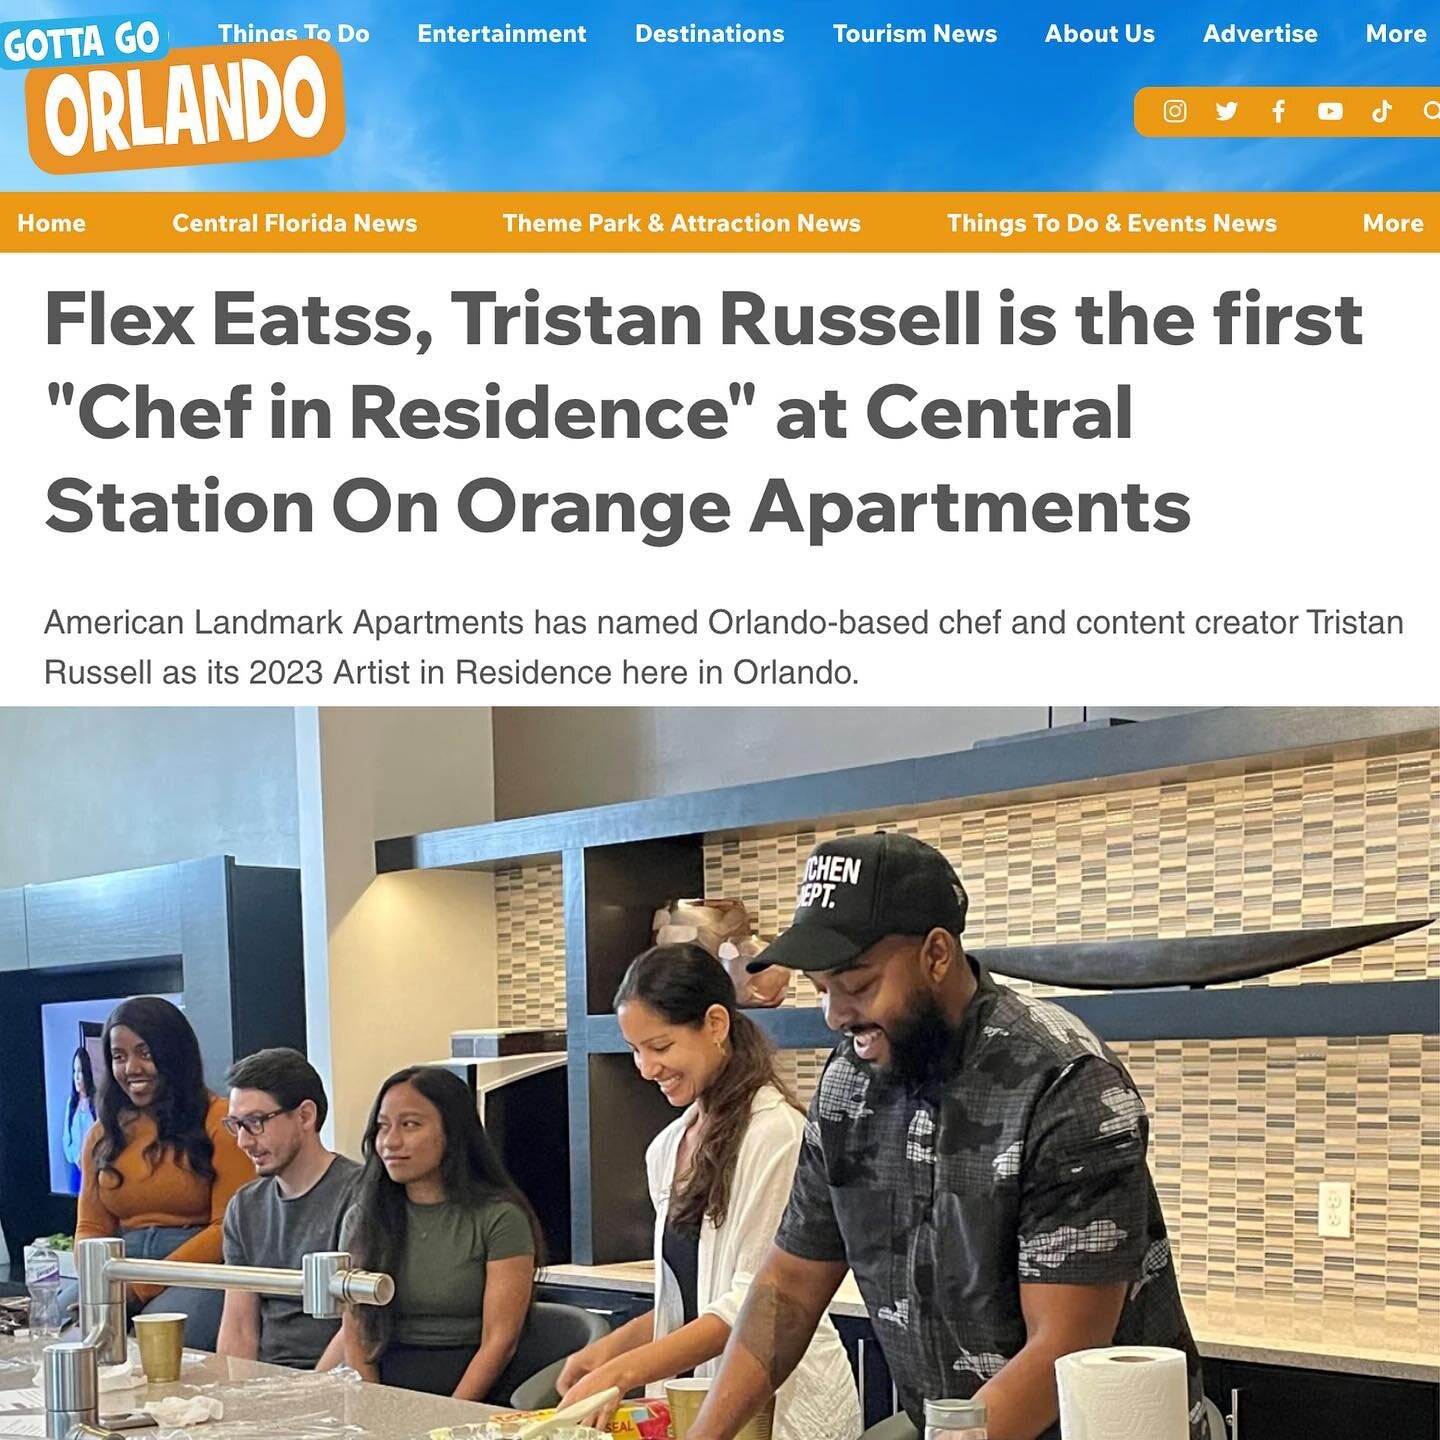 New article featuring @flexeatss and #centralstationonorange in Downtown Orlando! Read more at the link in bio 🌟
.
.
.
#americanlandmarkapartments #americanlandmarkartists #culinaryarts #culinaryartist #culinaryartistinresidence #artistresidency #cu